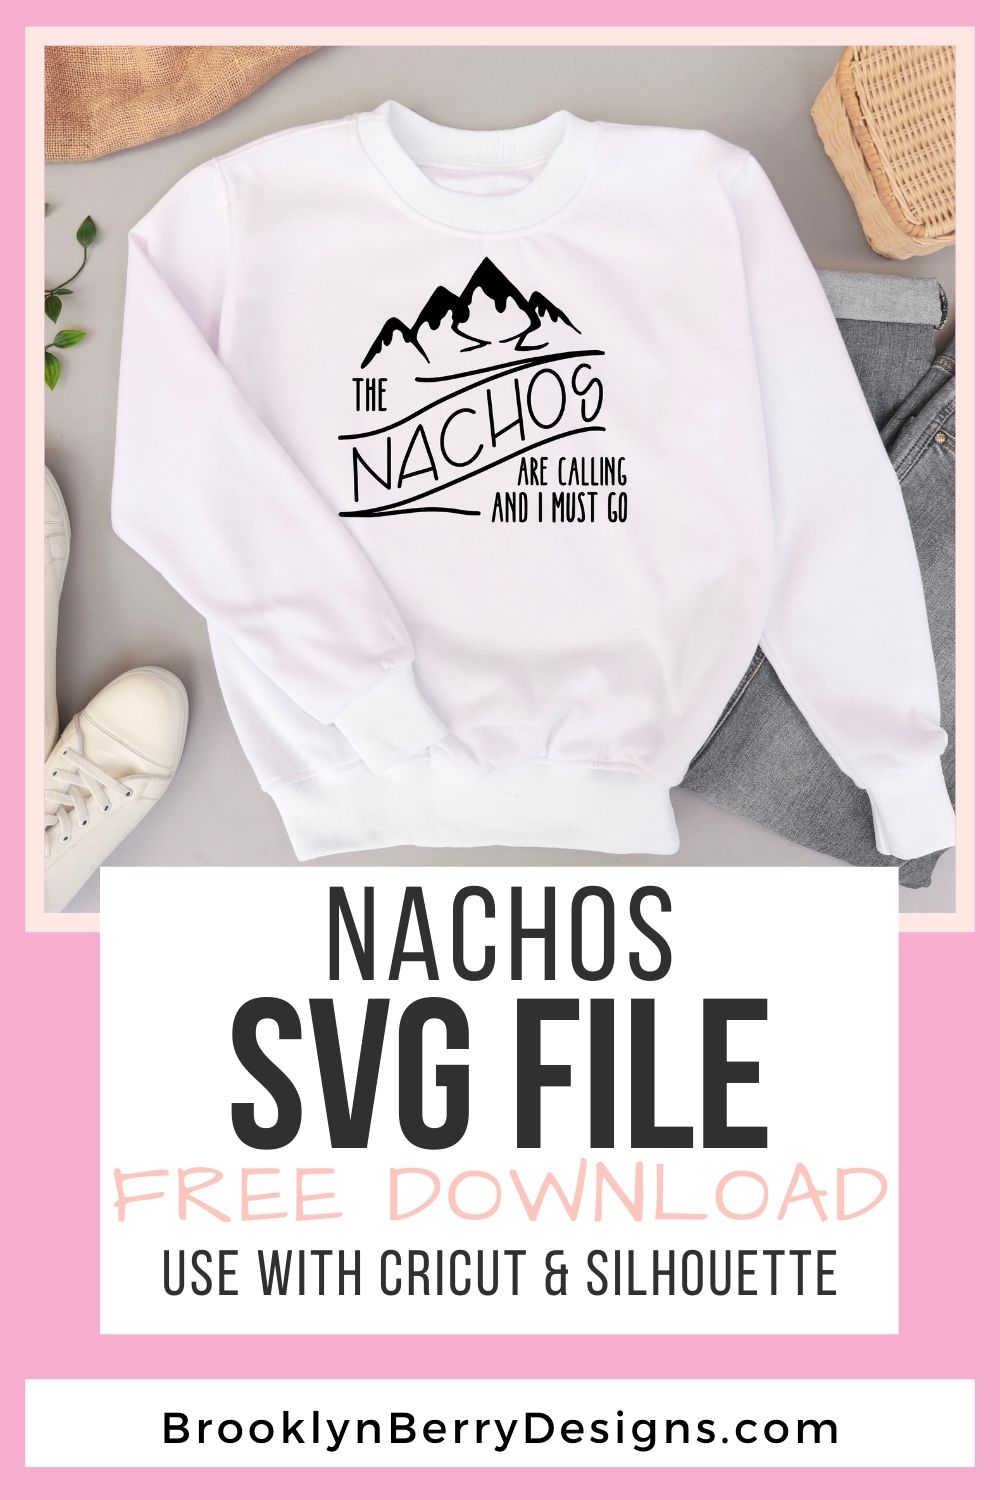 Make your own Nachos shirt with this free Nachos Are Calling SVG. The Nachos Are Calling and I must Go - For those that love food more than they love the outdoors. via @brookeberry